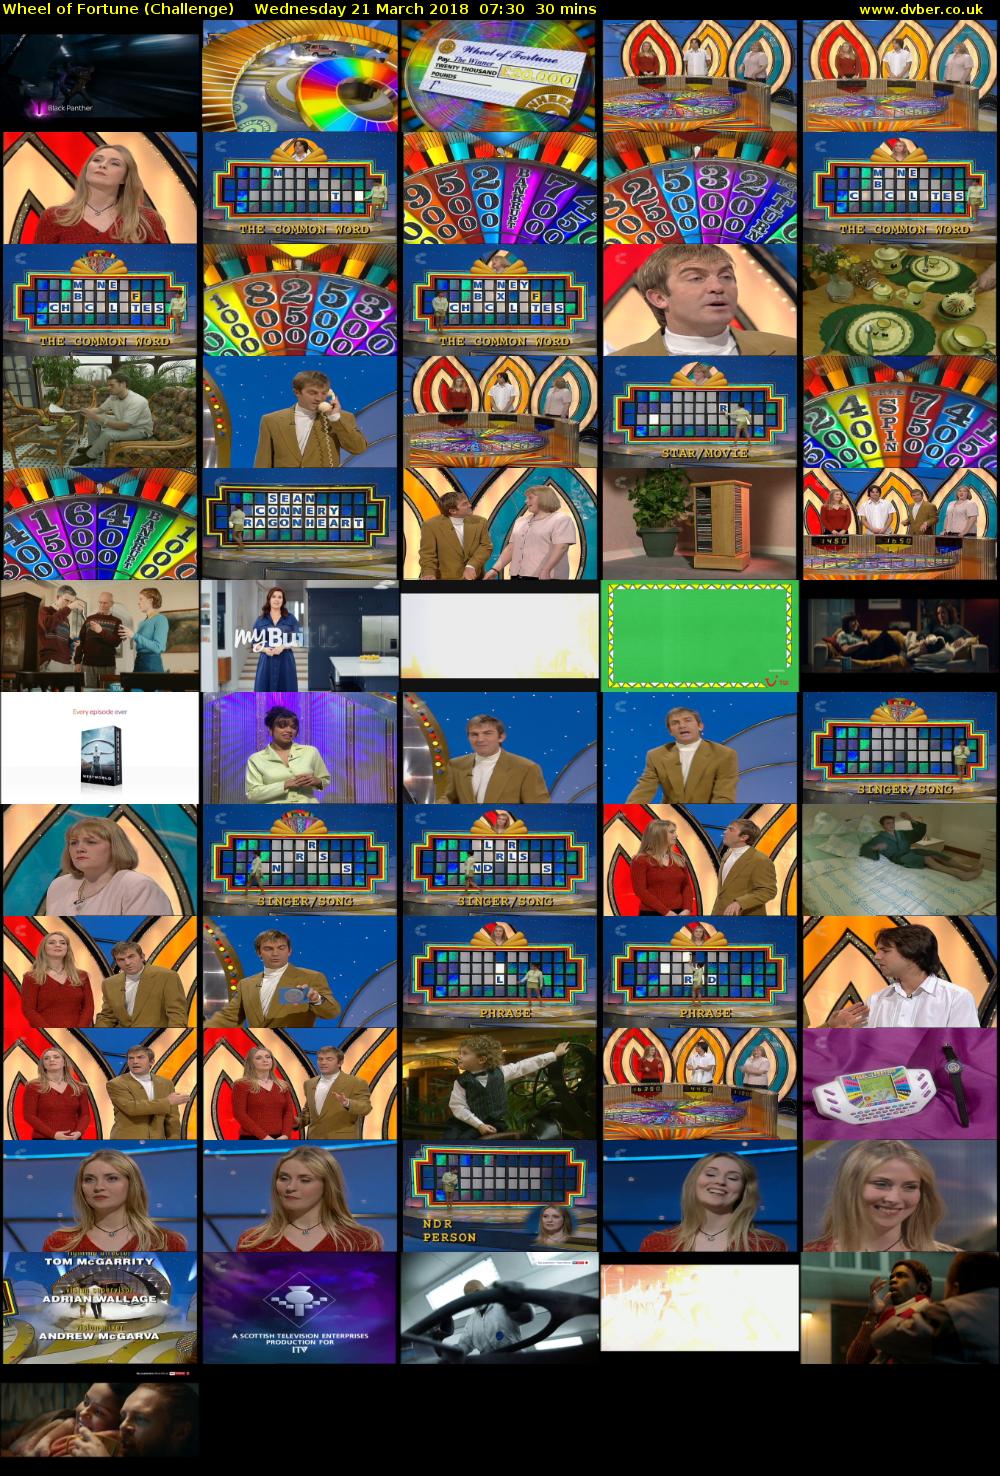 Wheel of Fortune (Challenge) Wednesday 21 March 2018 07:30 - 08:00